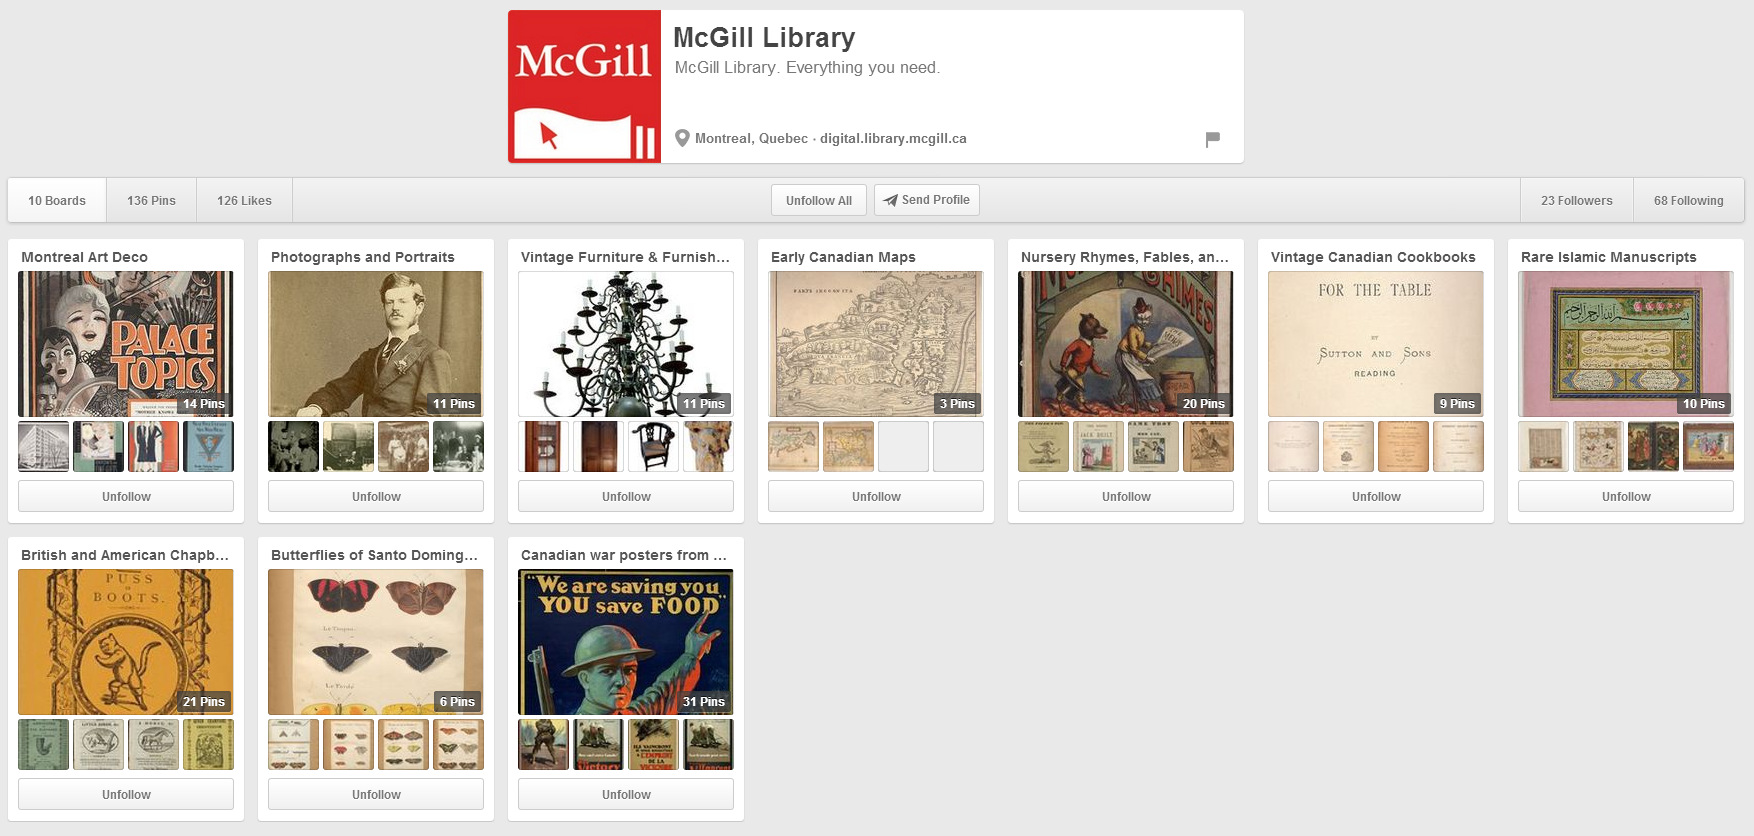 McGill Library's Pinterest page